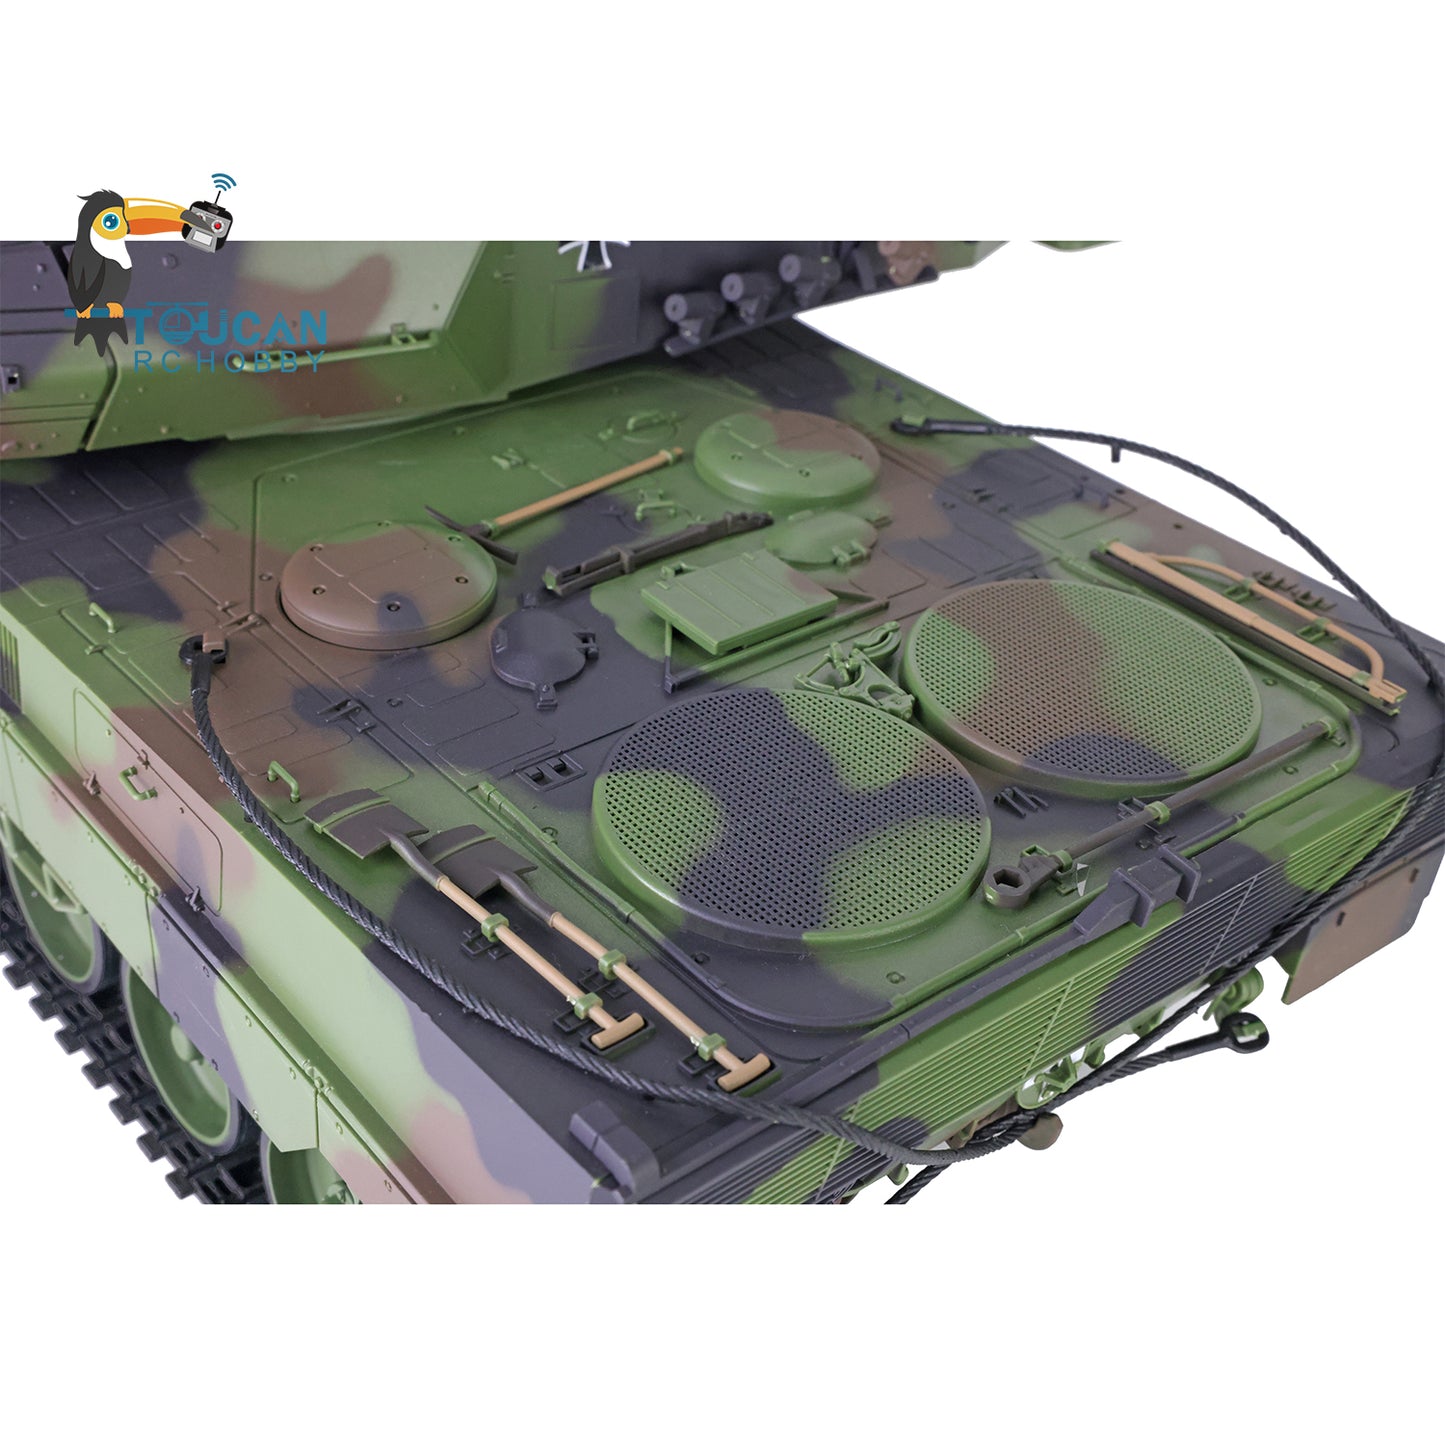 TK7.0 Edition Heng Long Ready to Run 1/16 Leopard2A6 RC Tank 3889 With Recoil Barrel Infrared Main Board Military Vehicle